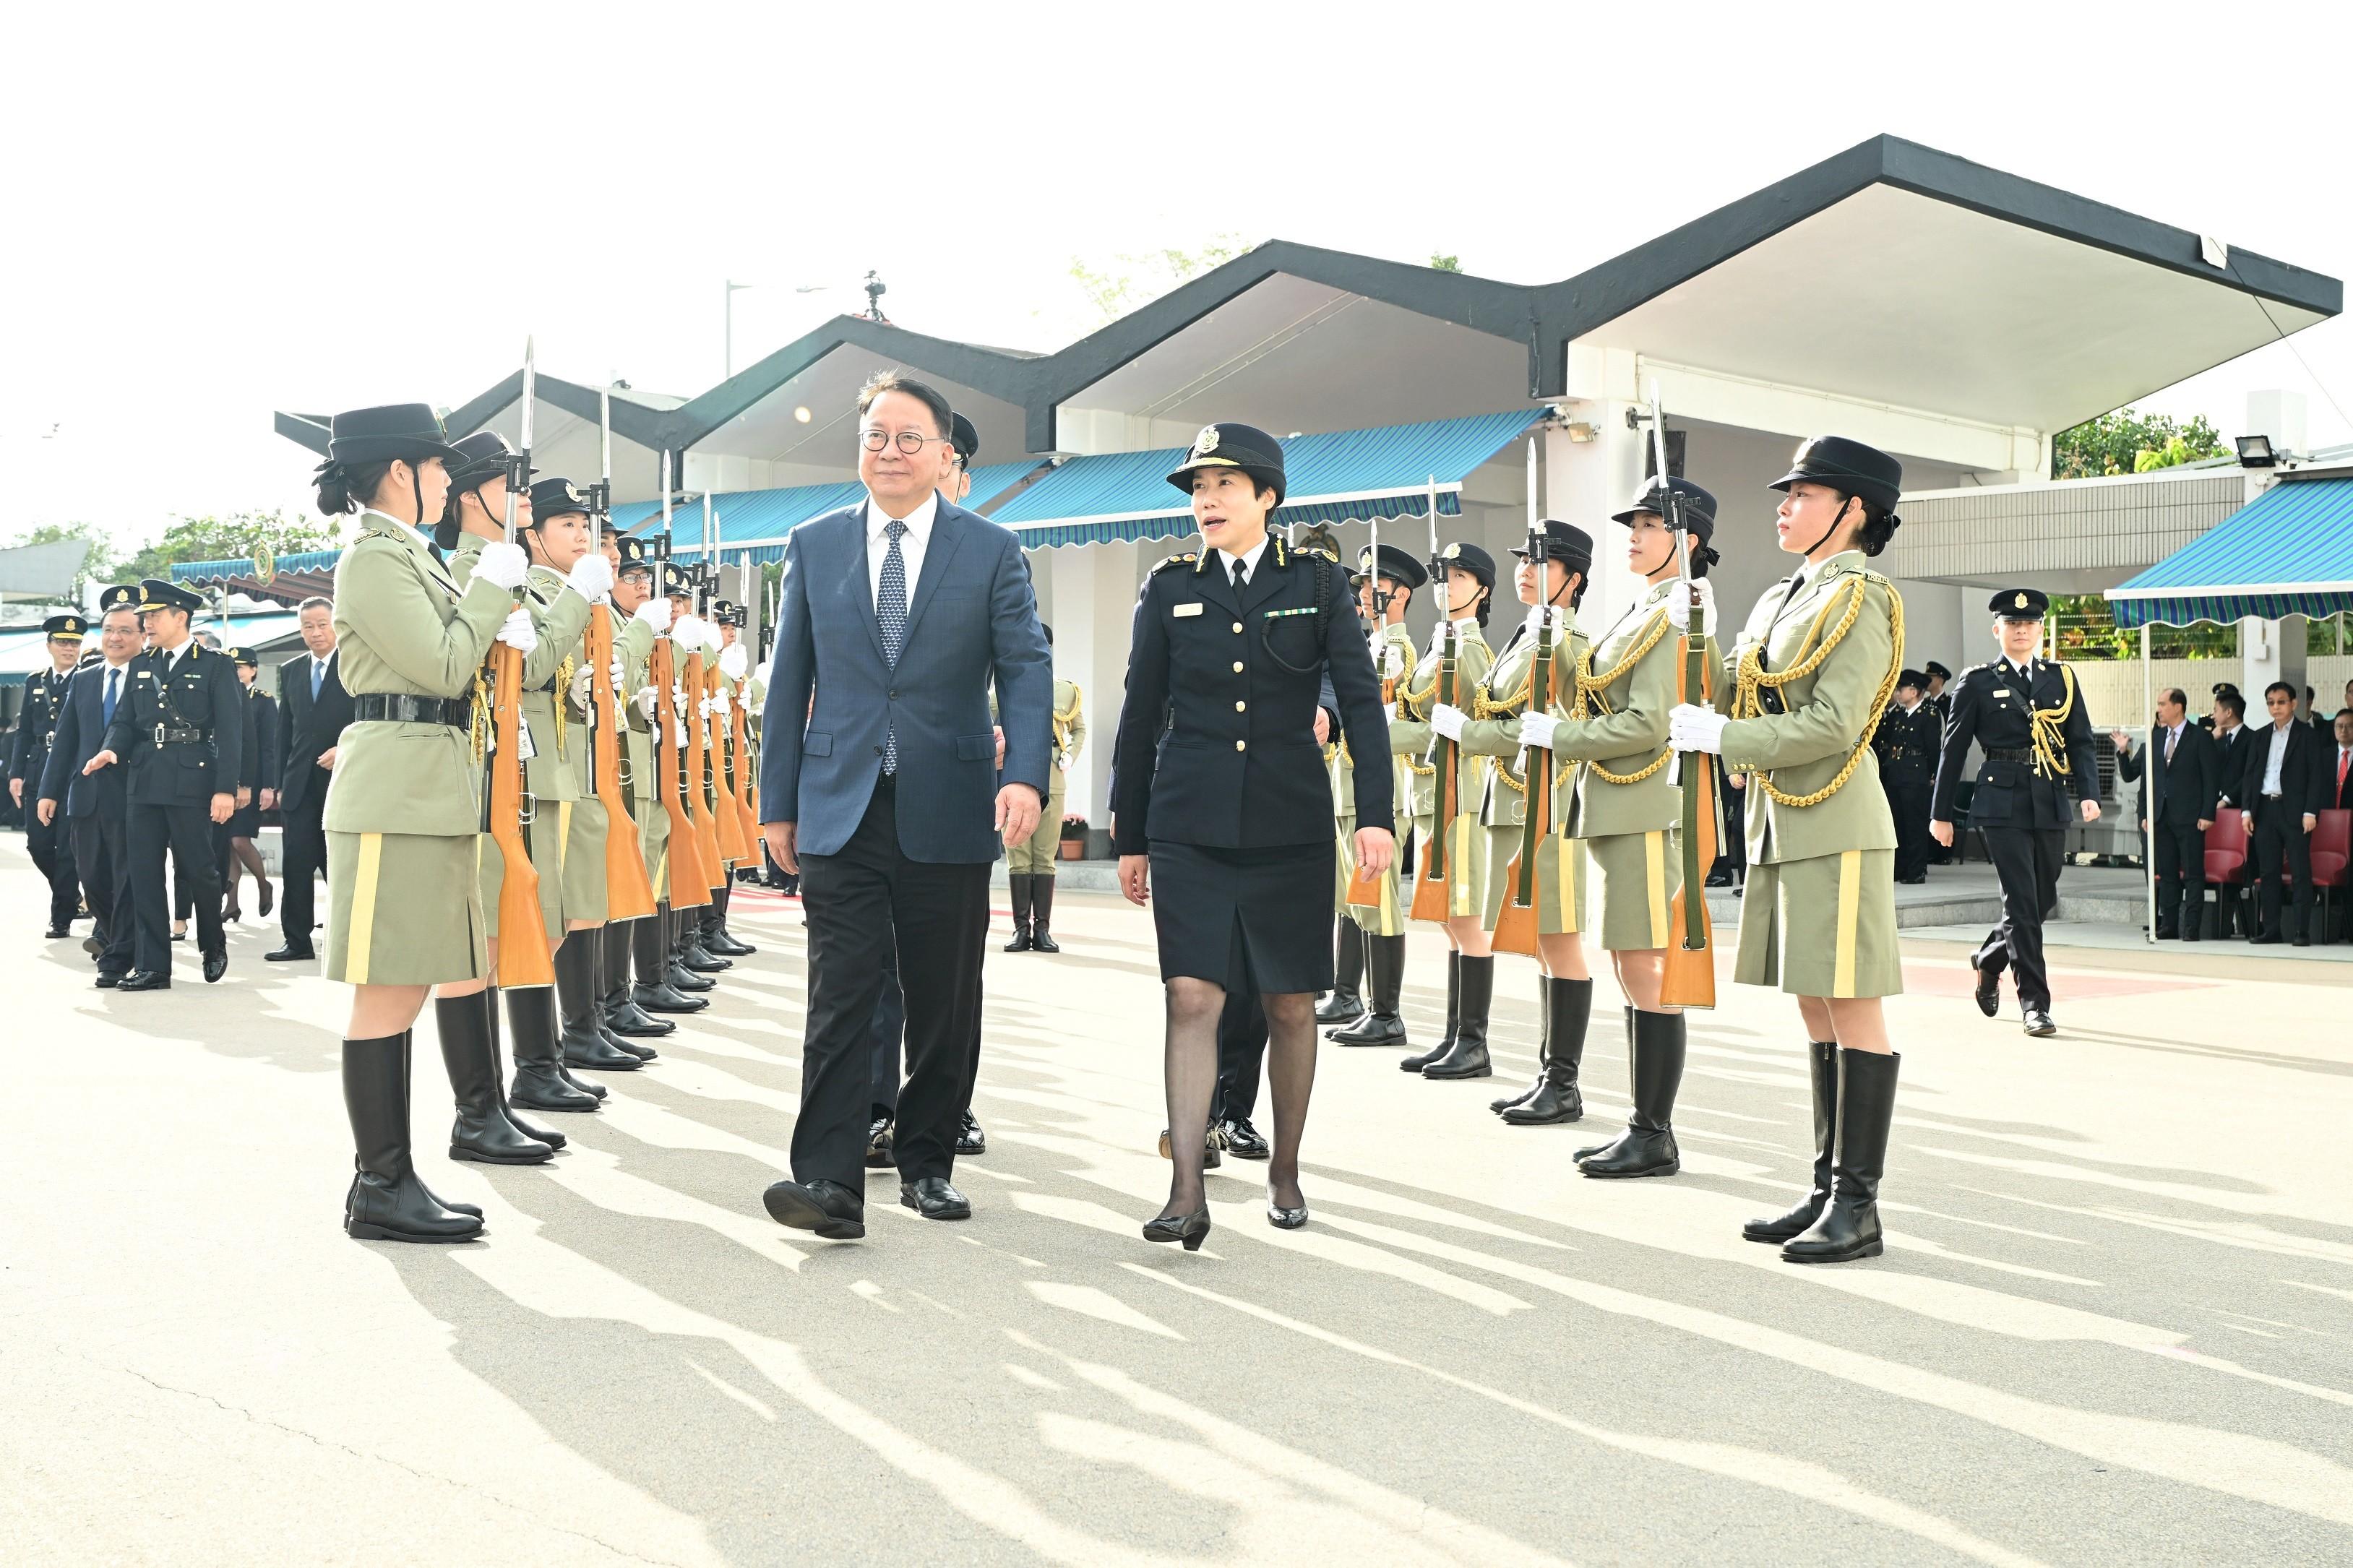 Hong Kong Customs Passing-out Parade was held today (December 8). Photo shows the Chief Secretary for Administration, Mr Chan Kwok-ki, (front row, left), inspecting the Customs and Excise Department Guards of Honour with the Commissioner of Customs and Excise, Ms Louise Ho (front row, right).